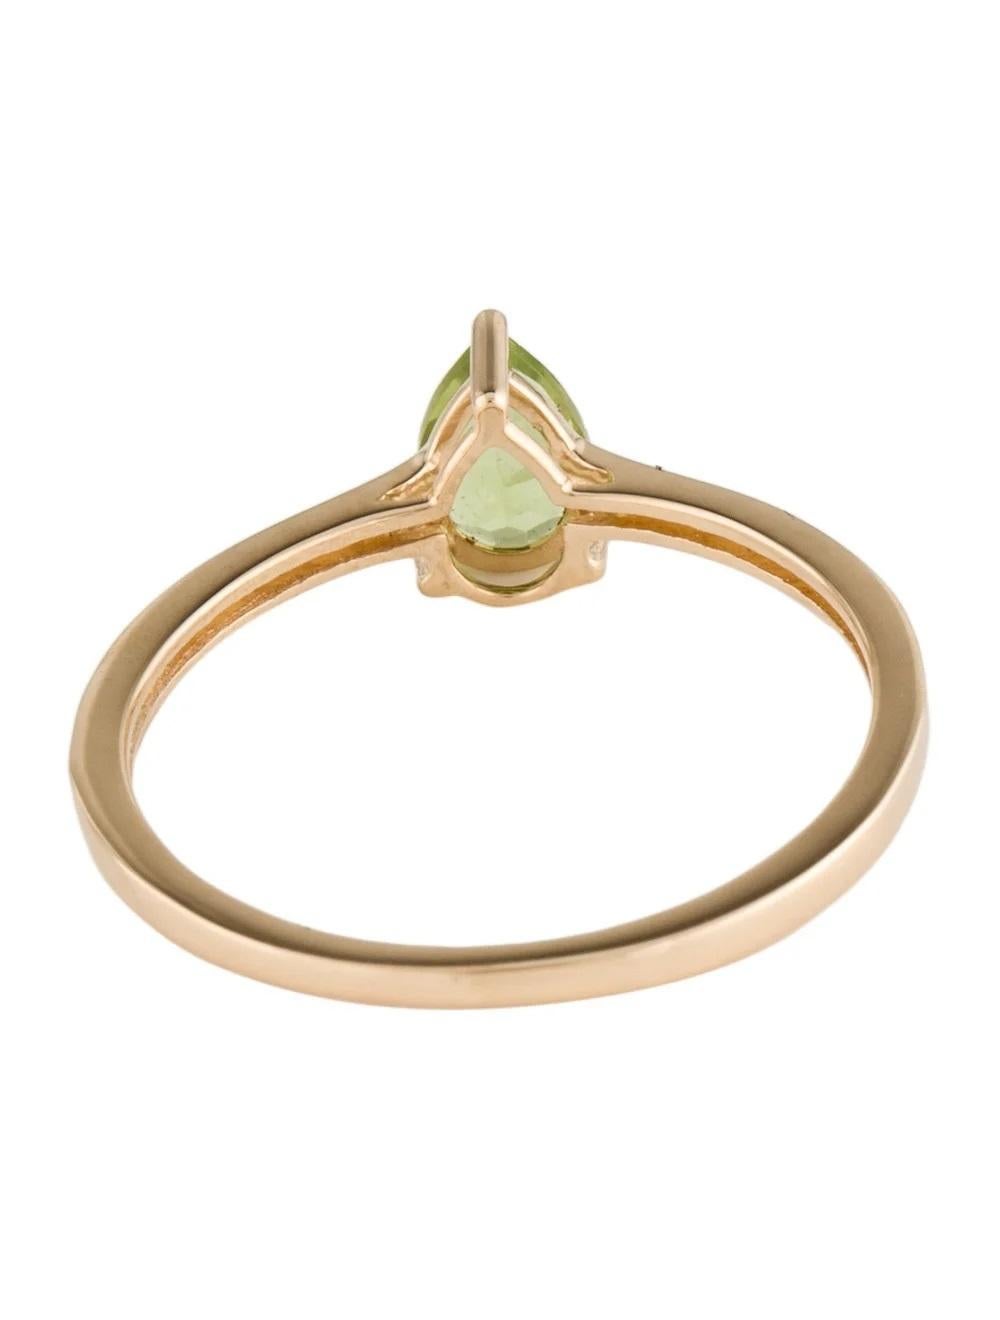 14K Peridot Cocktail Ring, Size 6.75 - Green Gemstone, Timeless Design, Elegant In New Condition For Sale In Holtsville, NY